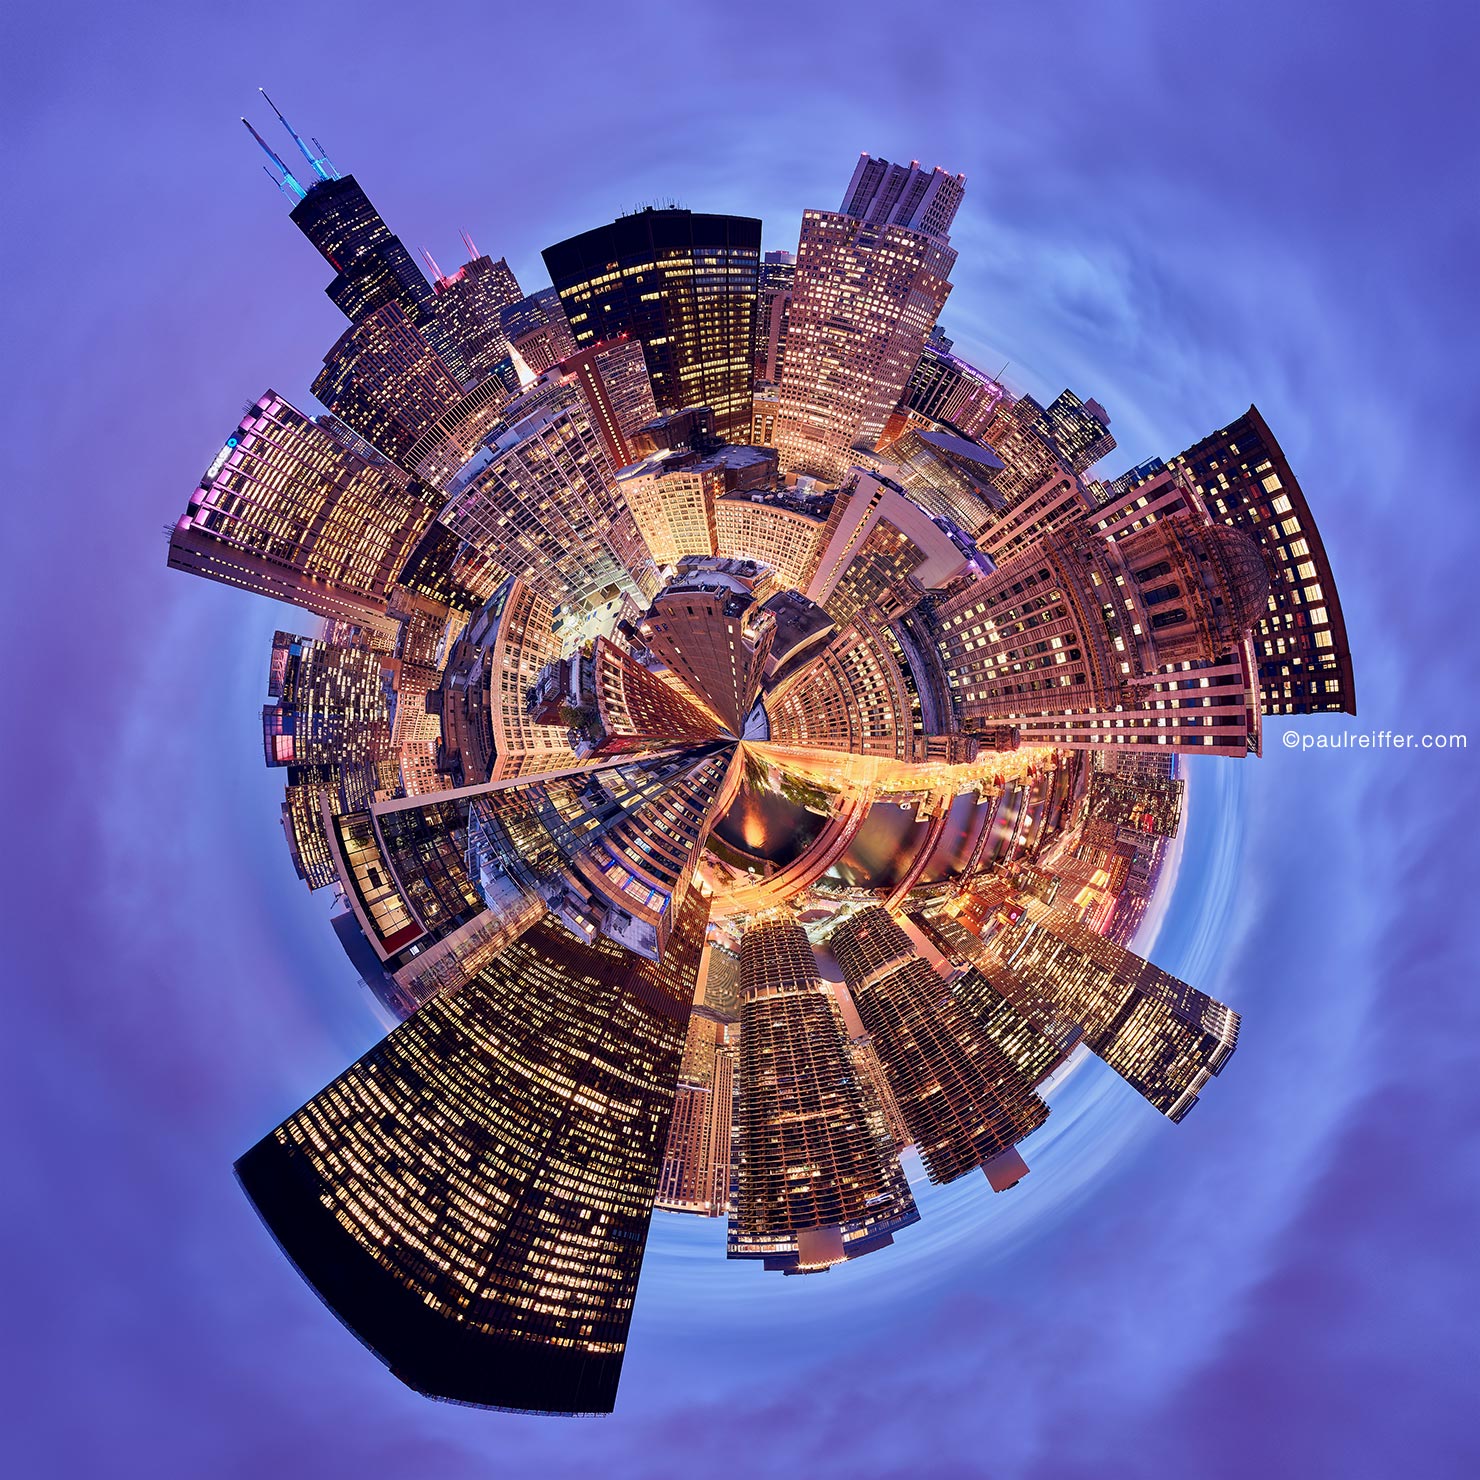 tiny planet rooftop chicago paul reiffer hard rock hotel carbide carbon river cityscape city night 100mp downtown 360 vr